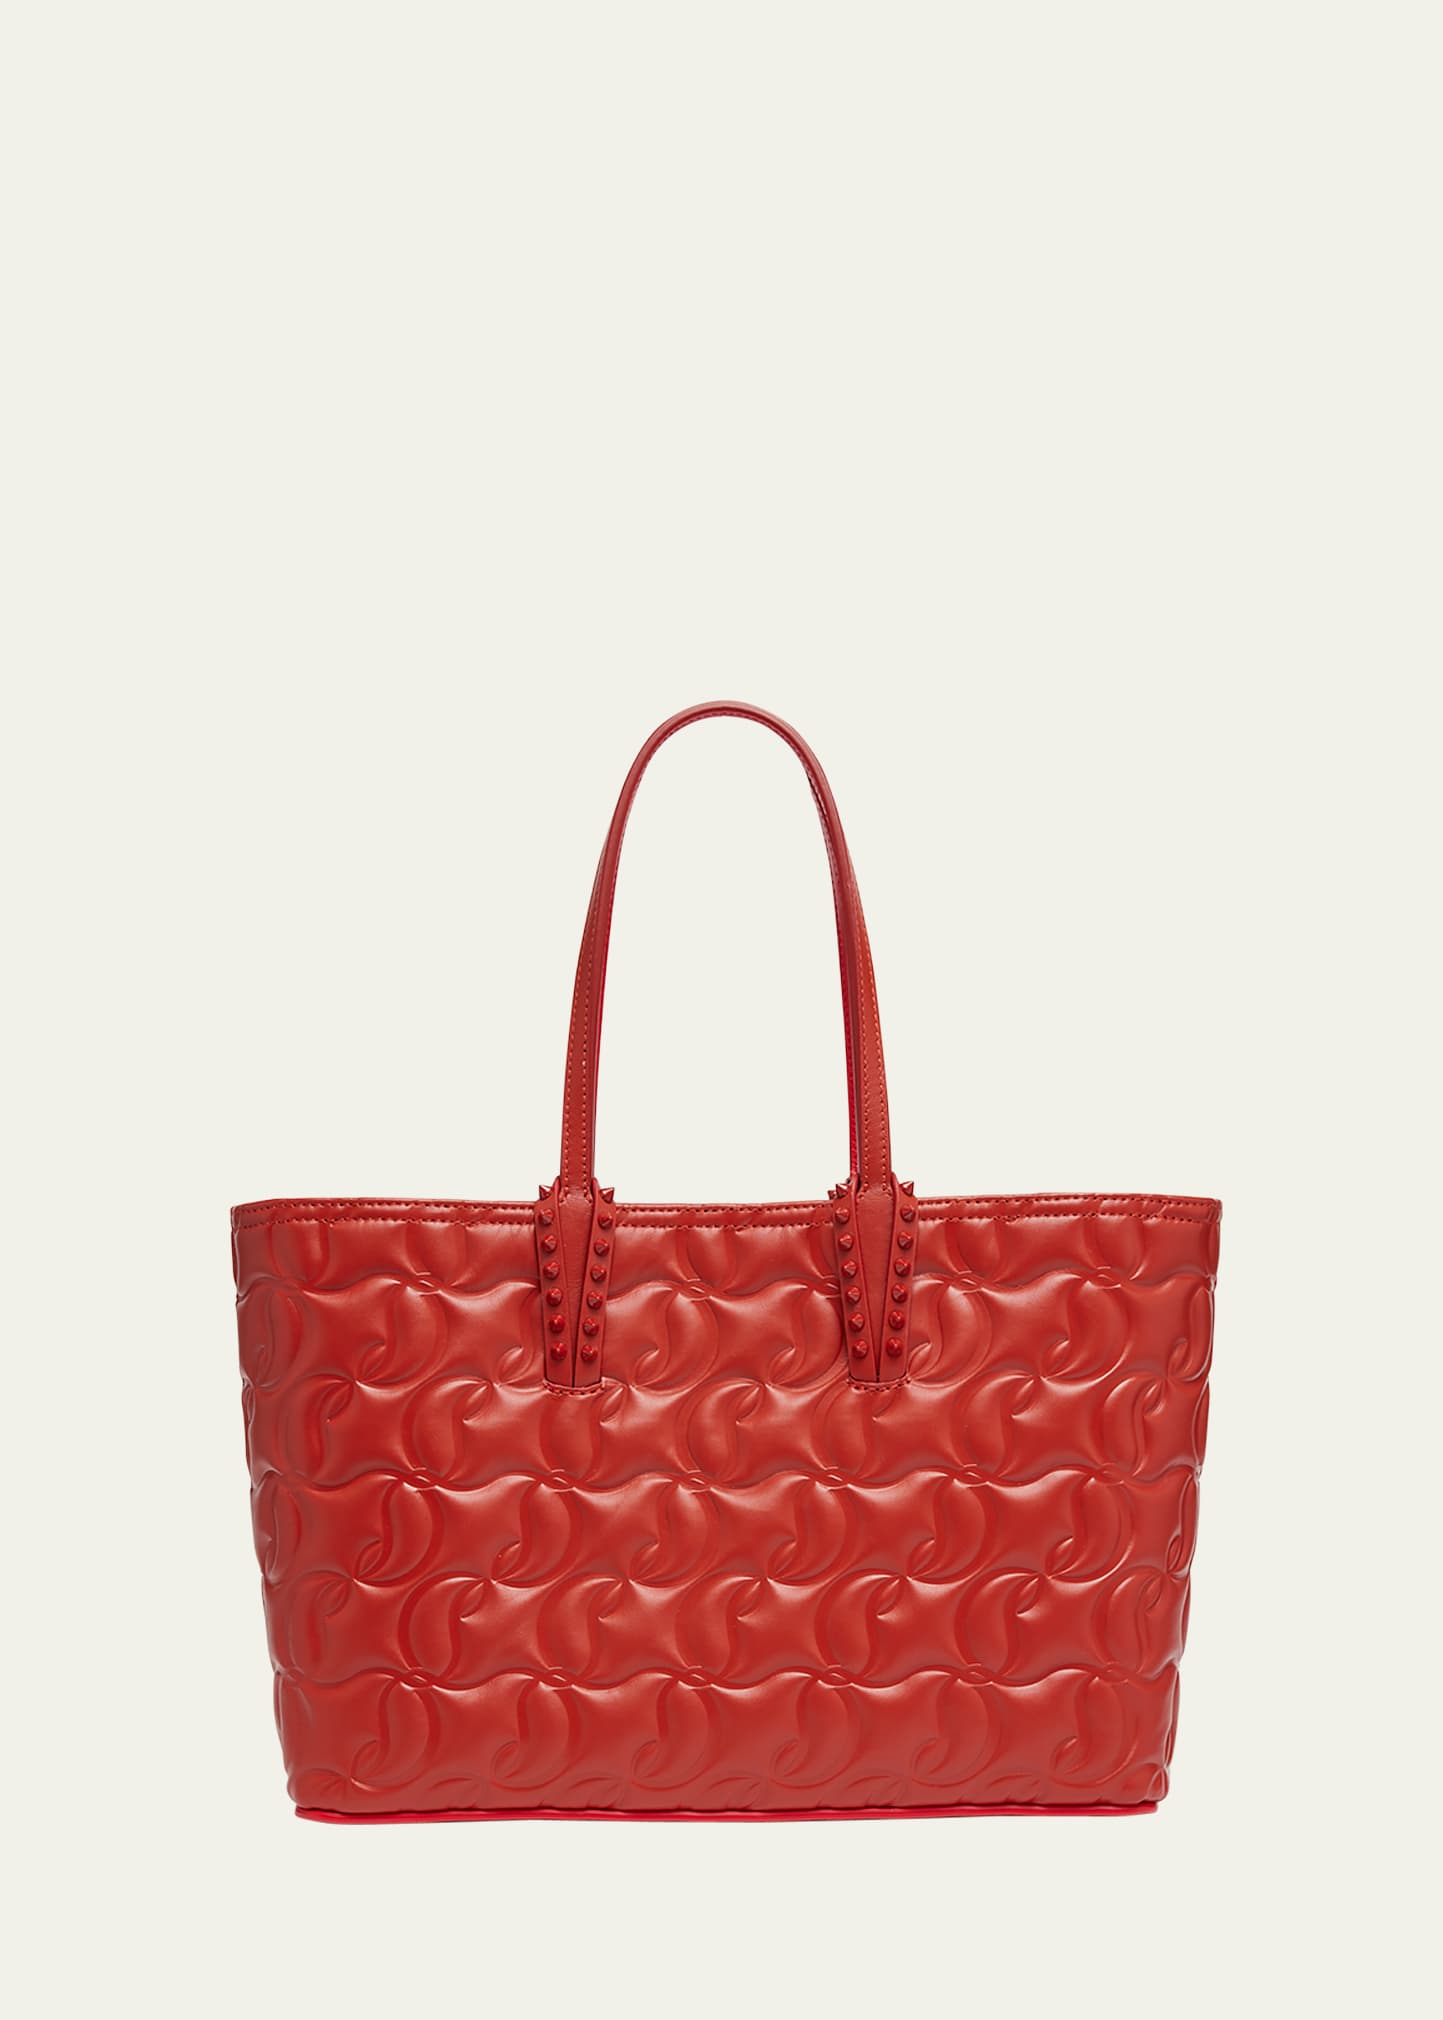 Cabata Small Tote in CL Embossed Nappa Leather